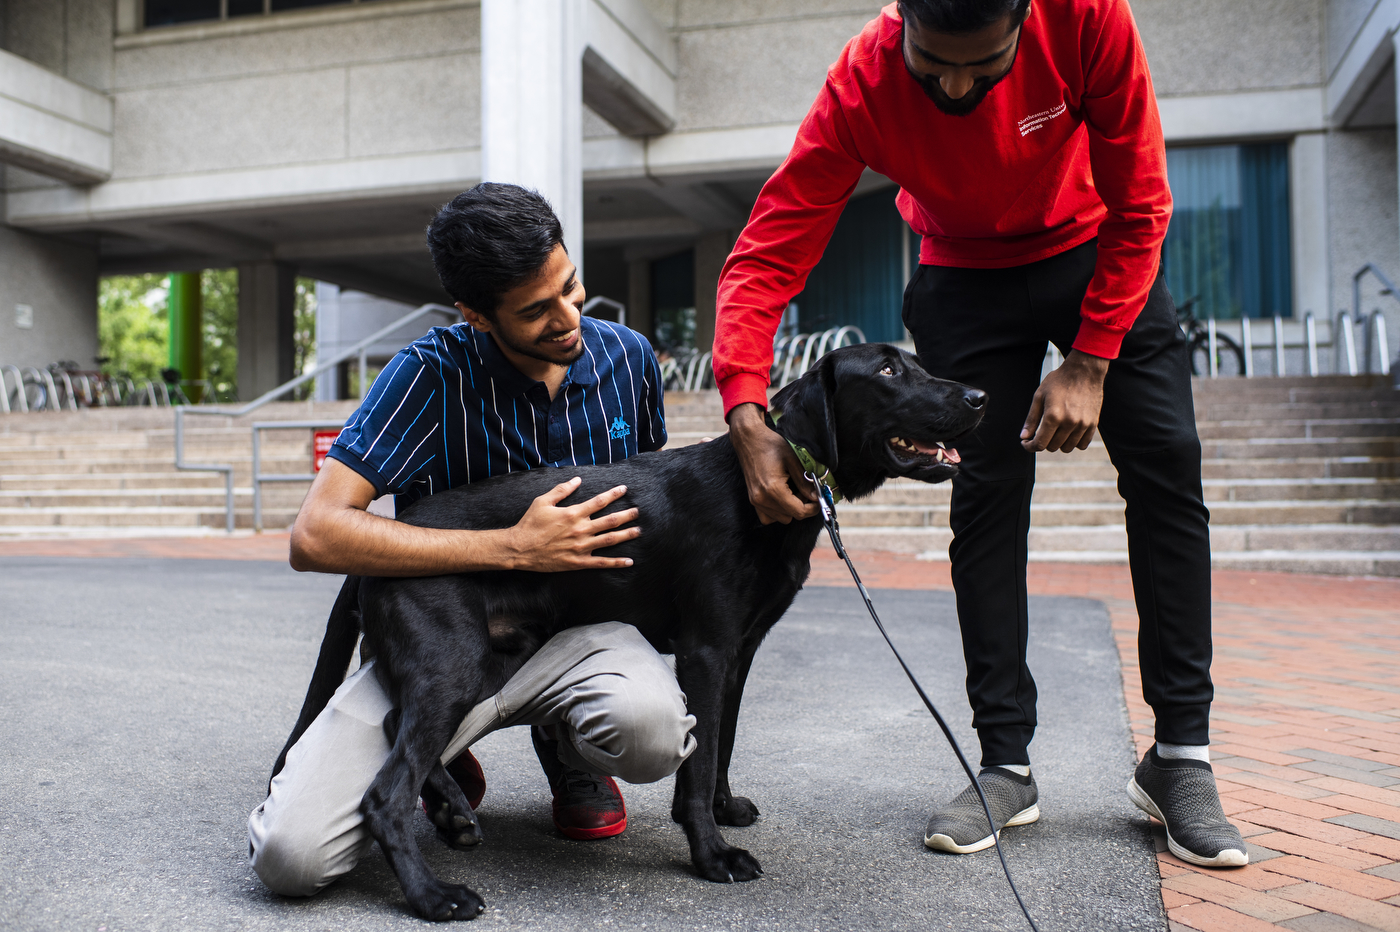 Sarge, a 1-year old black lab and the newest member of Northeastern's pack, greets staff members Sharan Balasubramanian and Sanjith on the Boston campus.